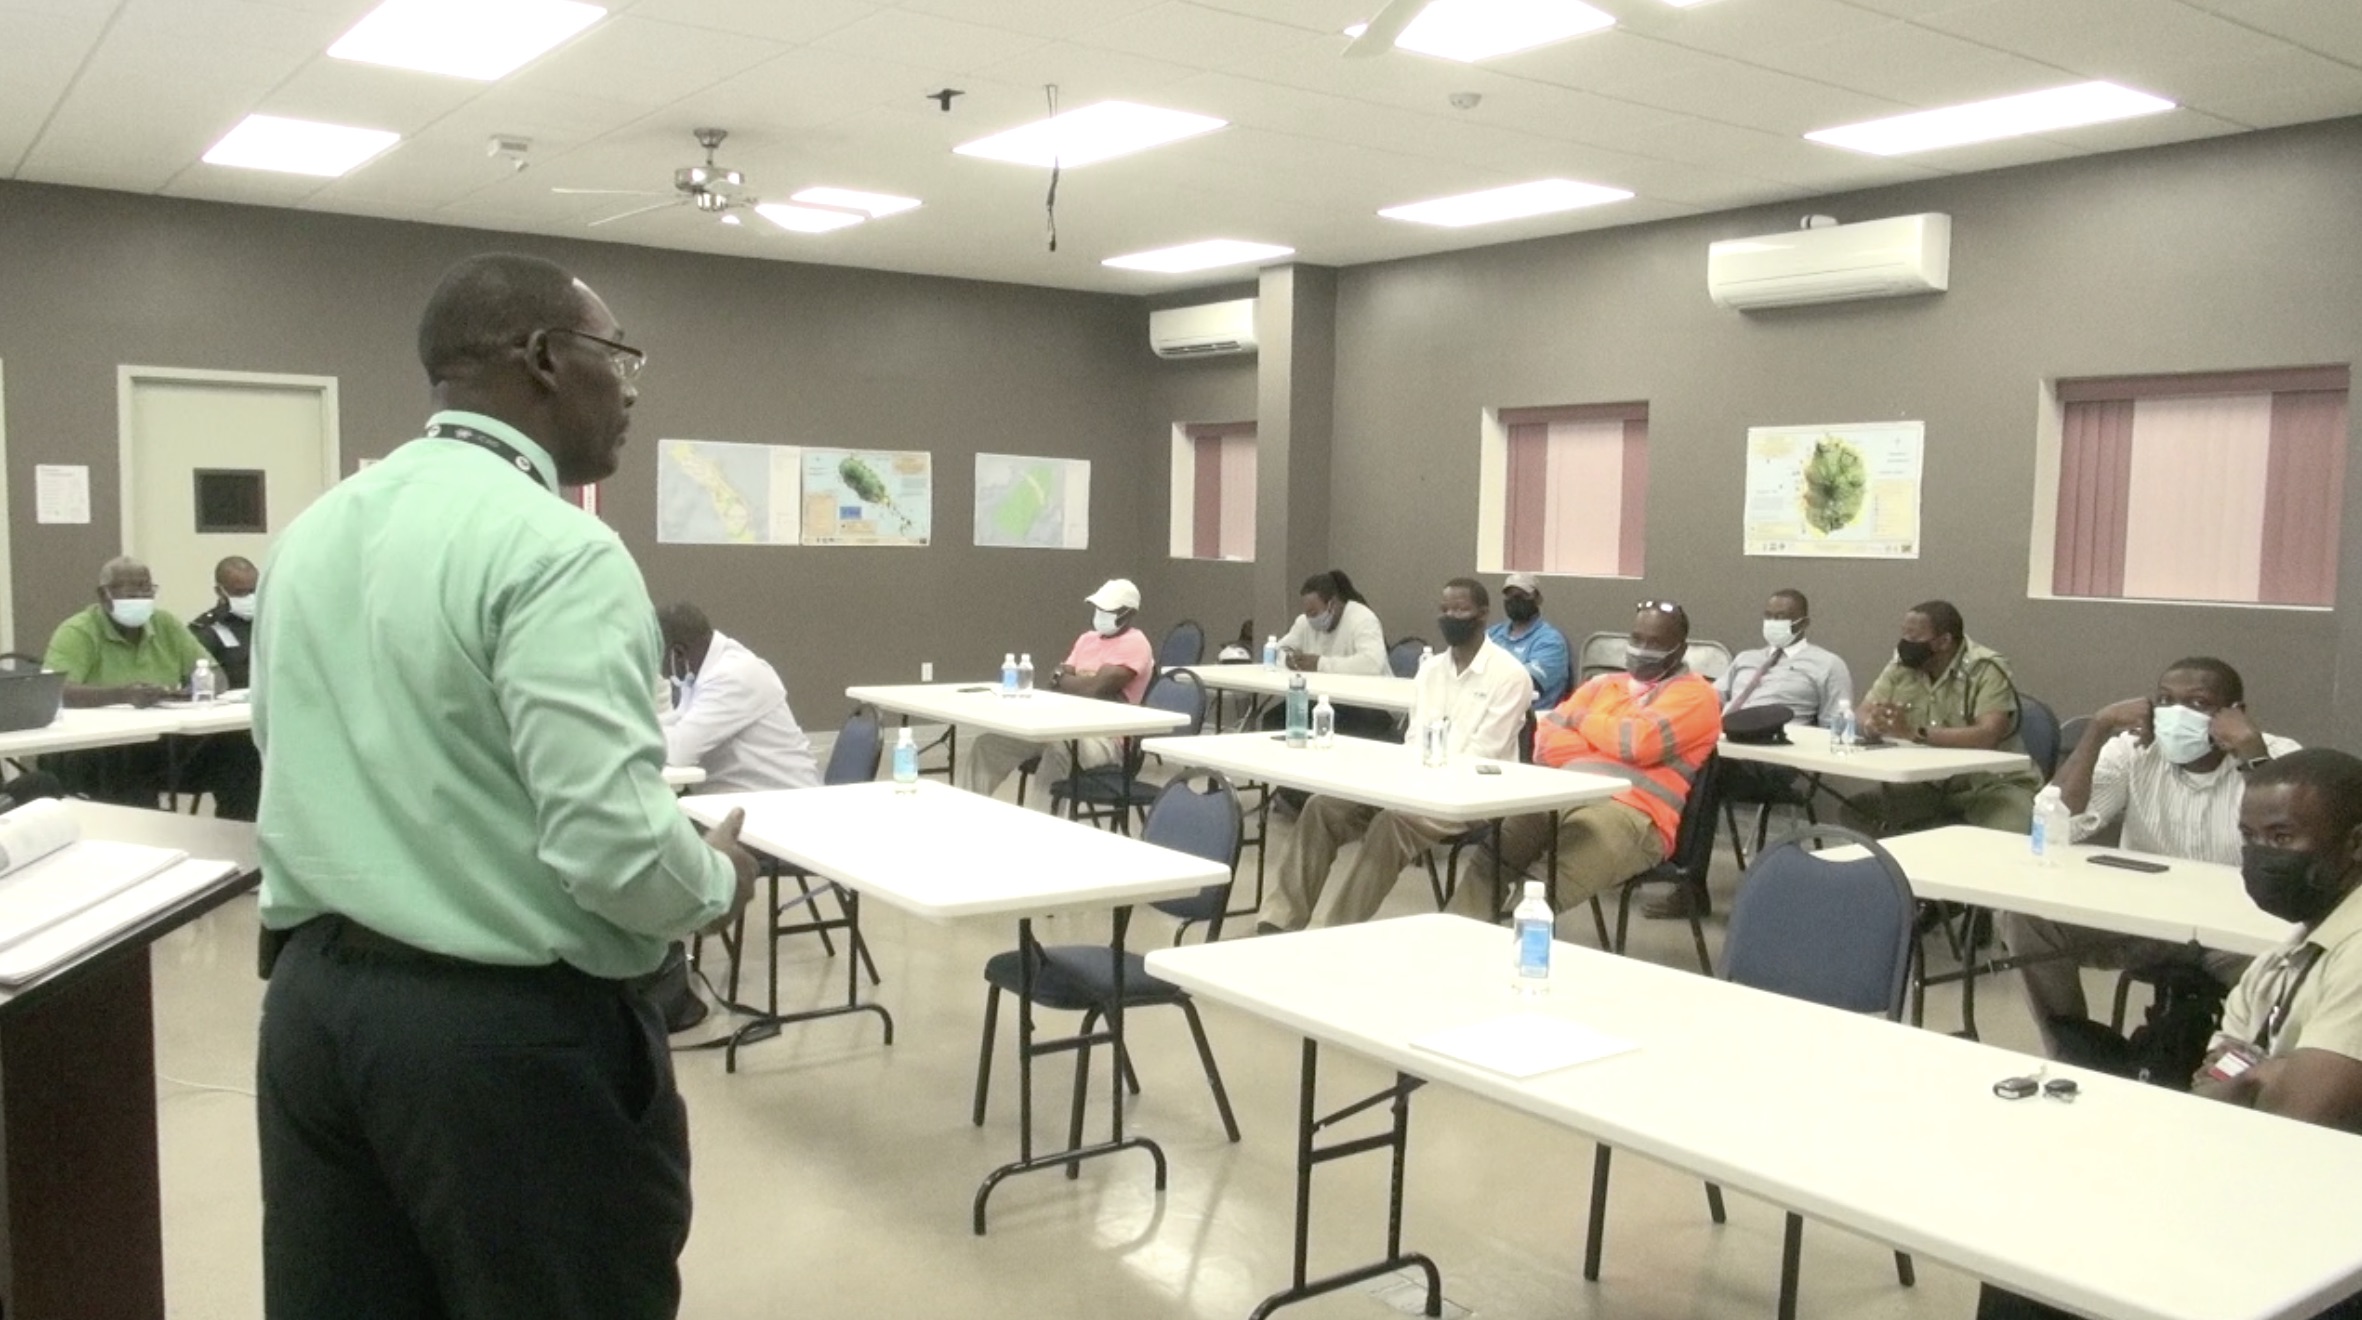 Mr. Royston Griffin, Civil Aviation Officer at the Civil Aviation Division in the Ministry of Foreign Affairs and Aviation giving an overview to drone operators present at a briefing hosted by the Ministry of Foreign Affairs and Aviation on April 13, 2021, at the Nevis Disaster Management Department’s conference room at Long Point